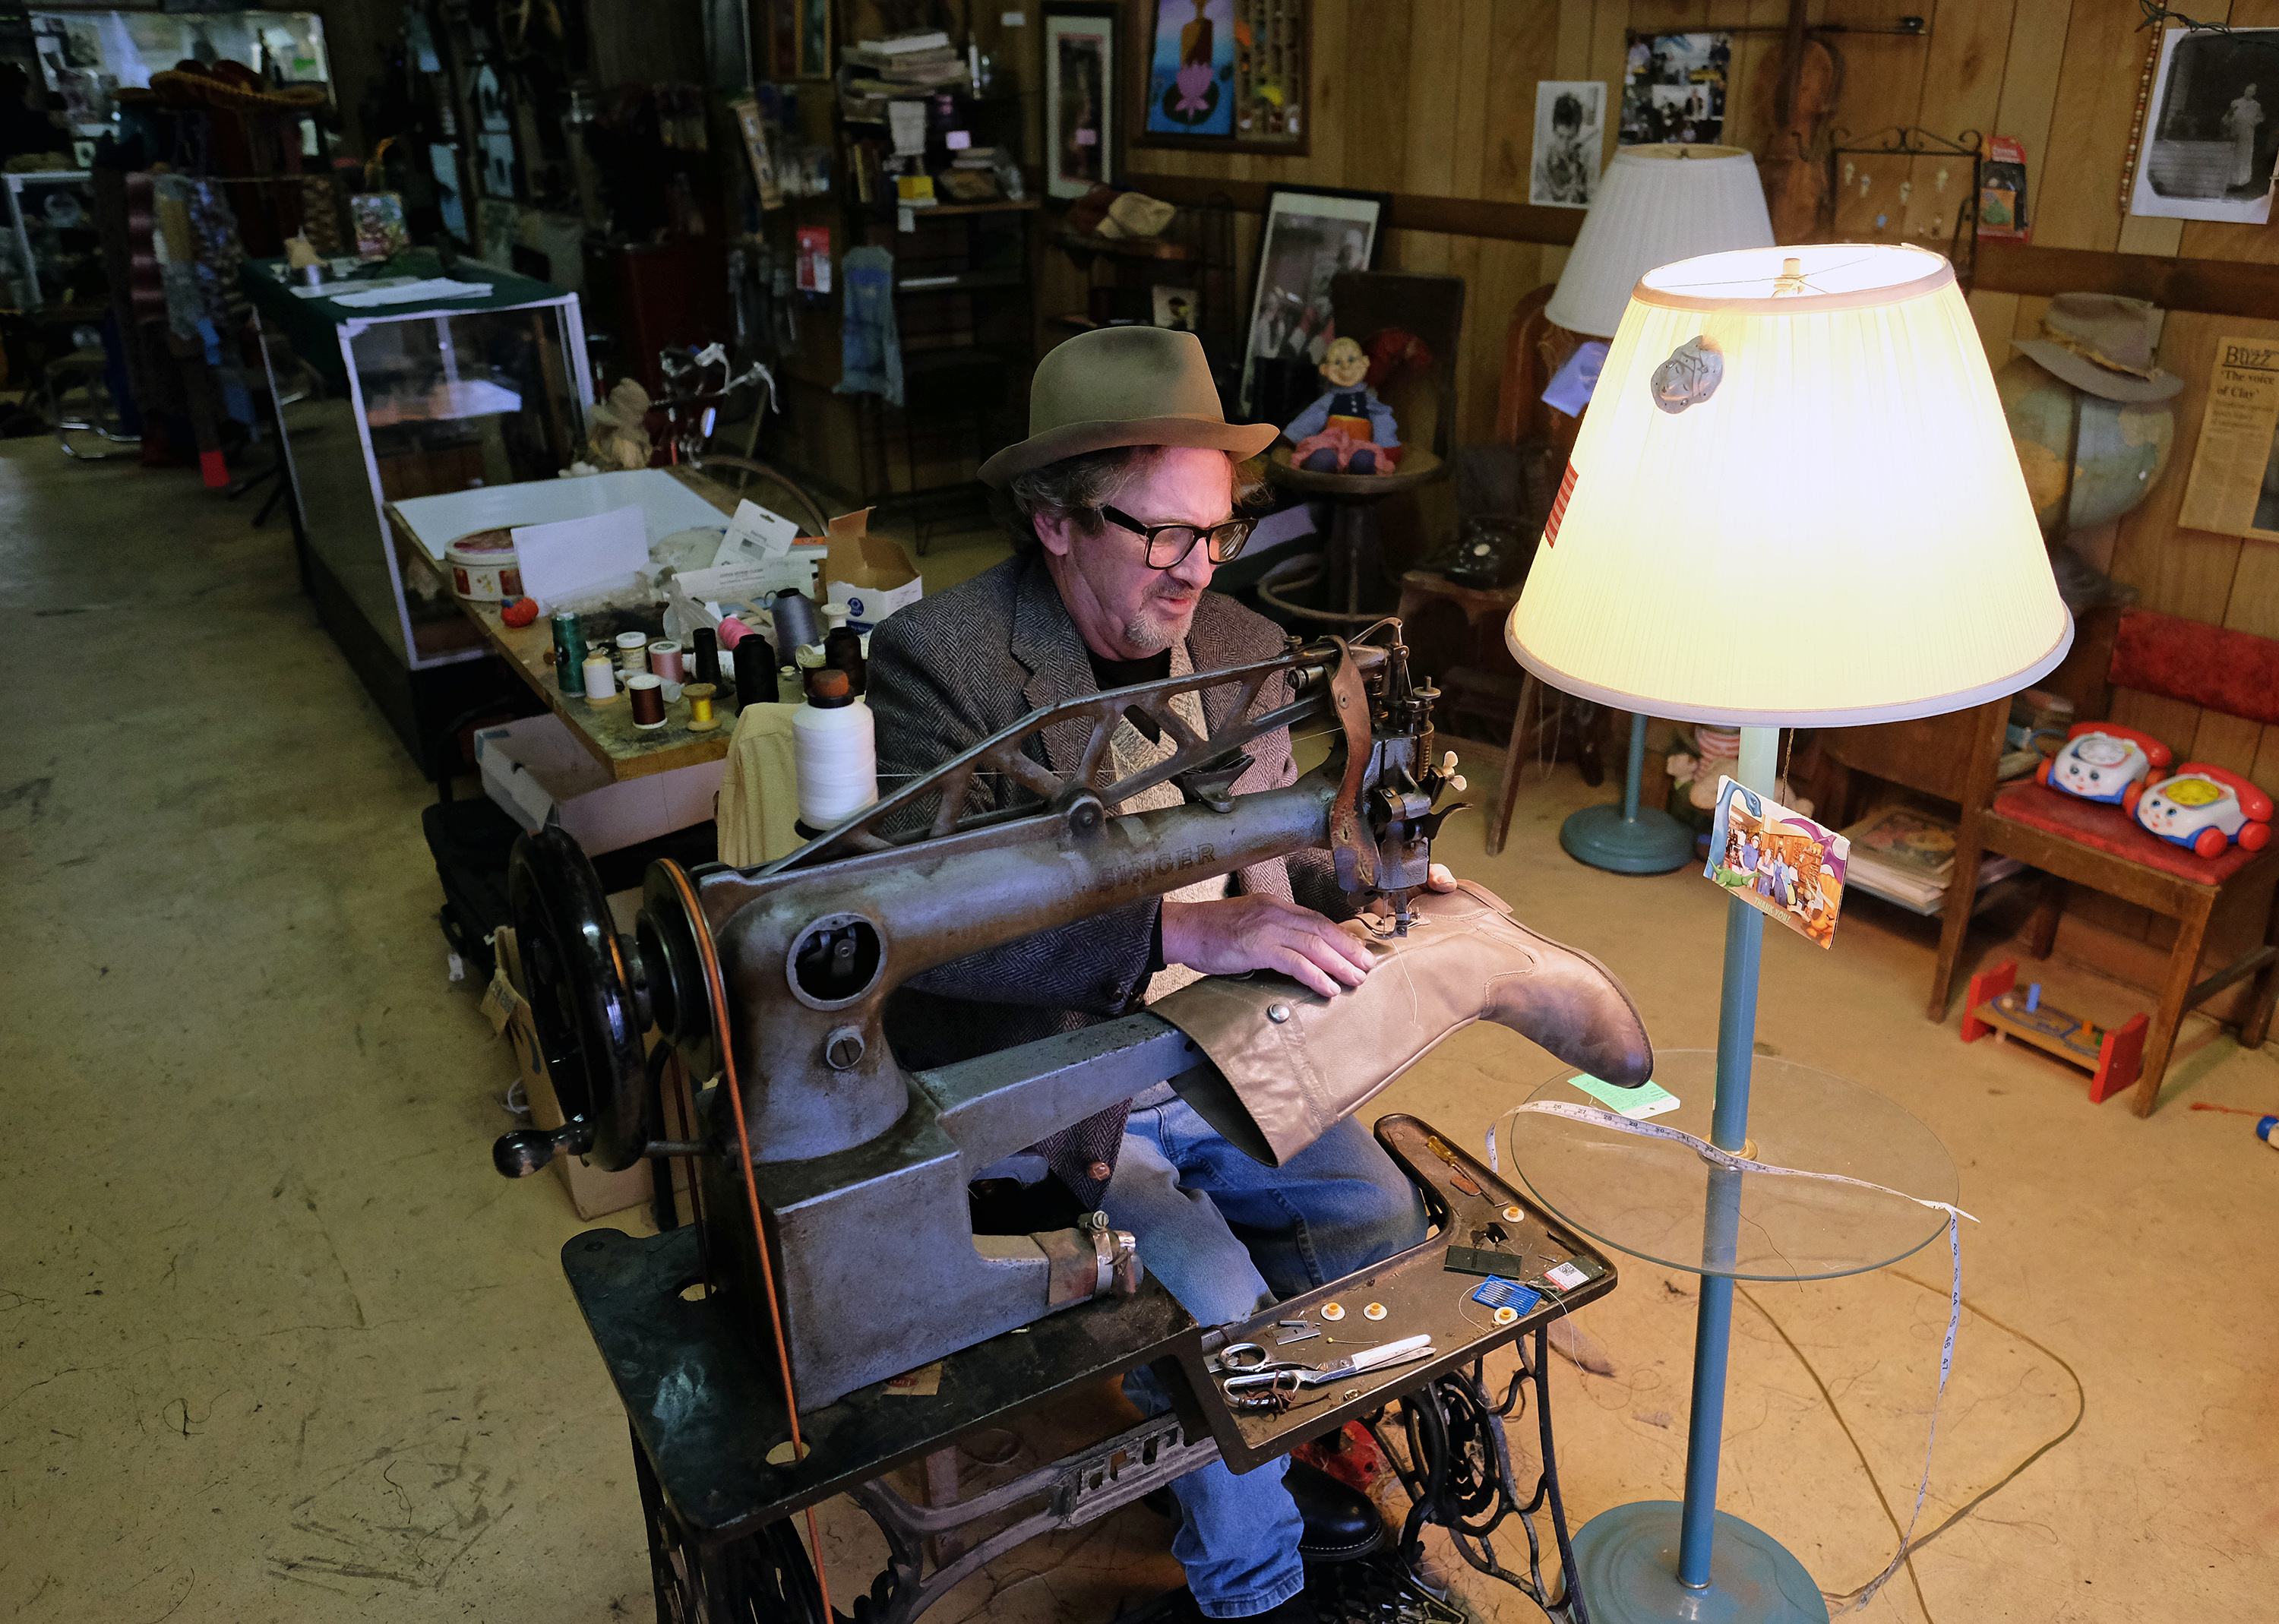 David Young sews a boot on an old Singer treadle sewing machine,Wednesday Nov. 23, 2016. (Photo by Norm Shafer).